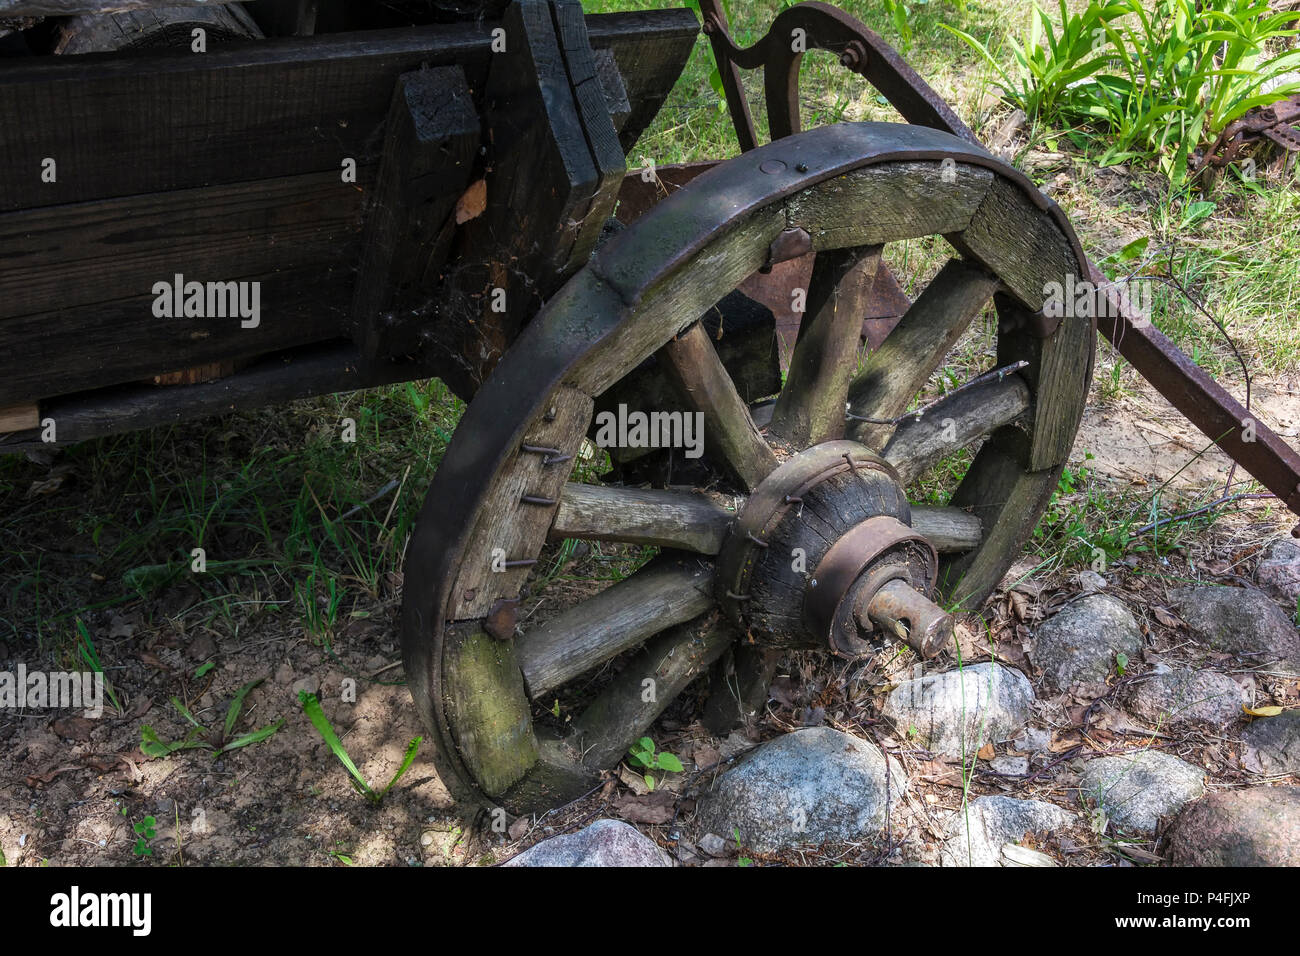 An old wooden wheel with a metal rim on a rural cart grew into the ground, close-up Stock Photo